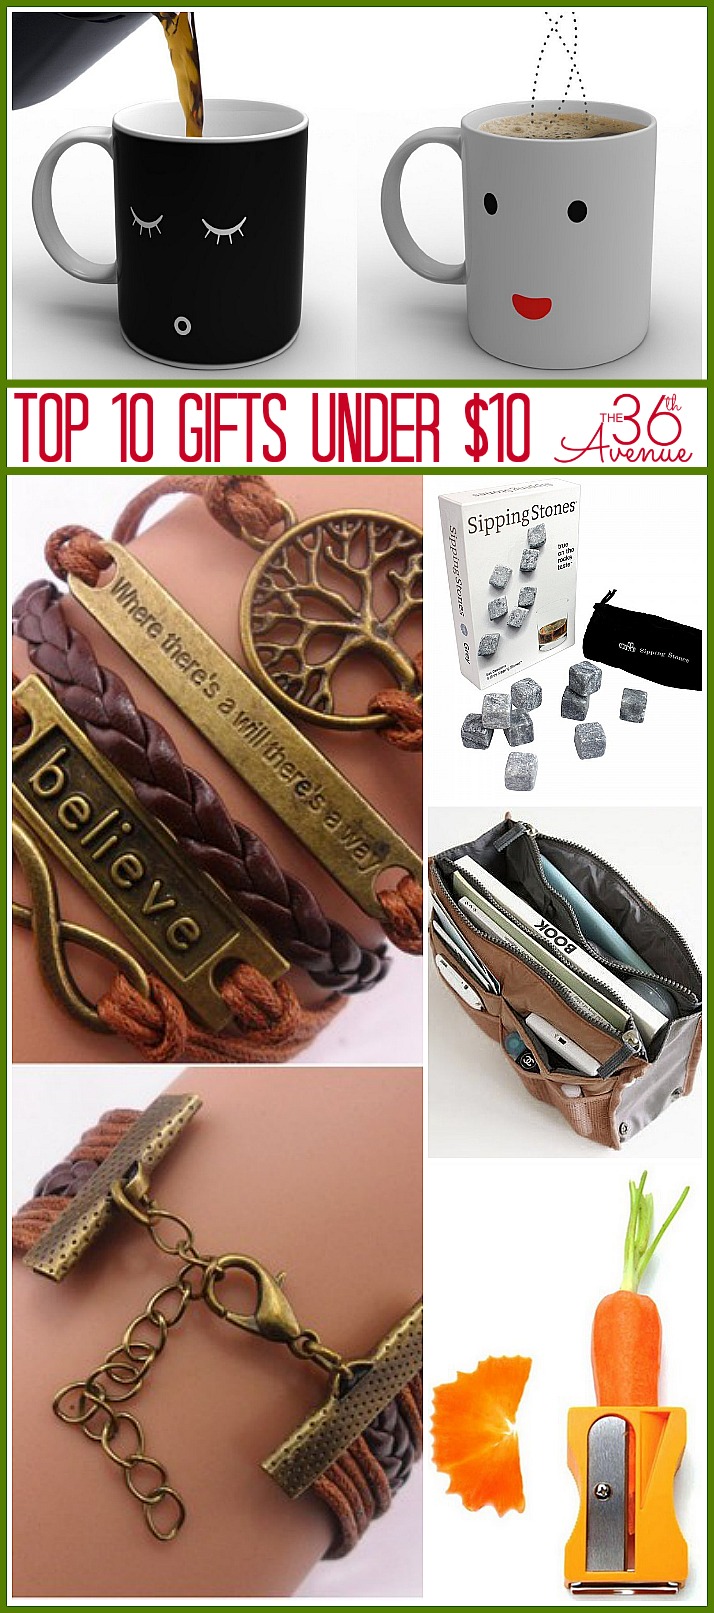 Top 10 GIFTS under $10 ...MUST SEE! 